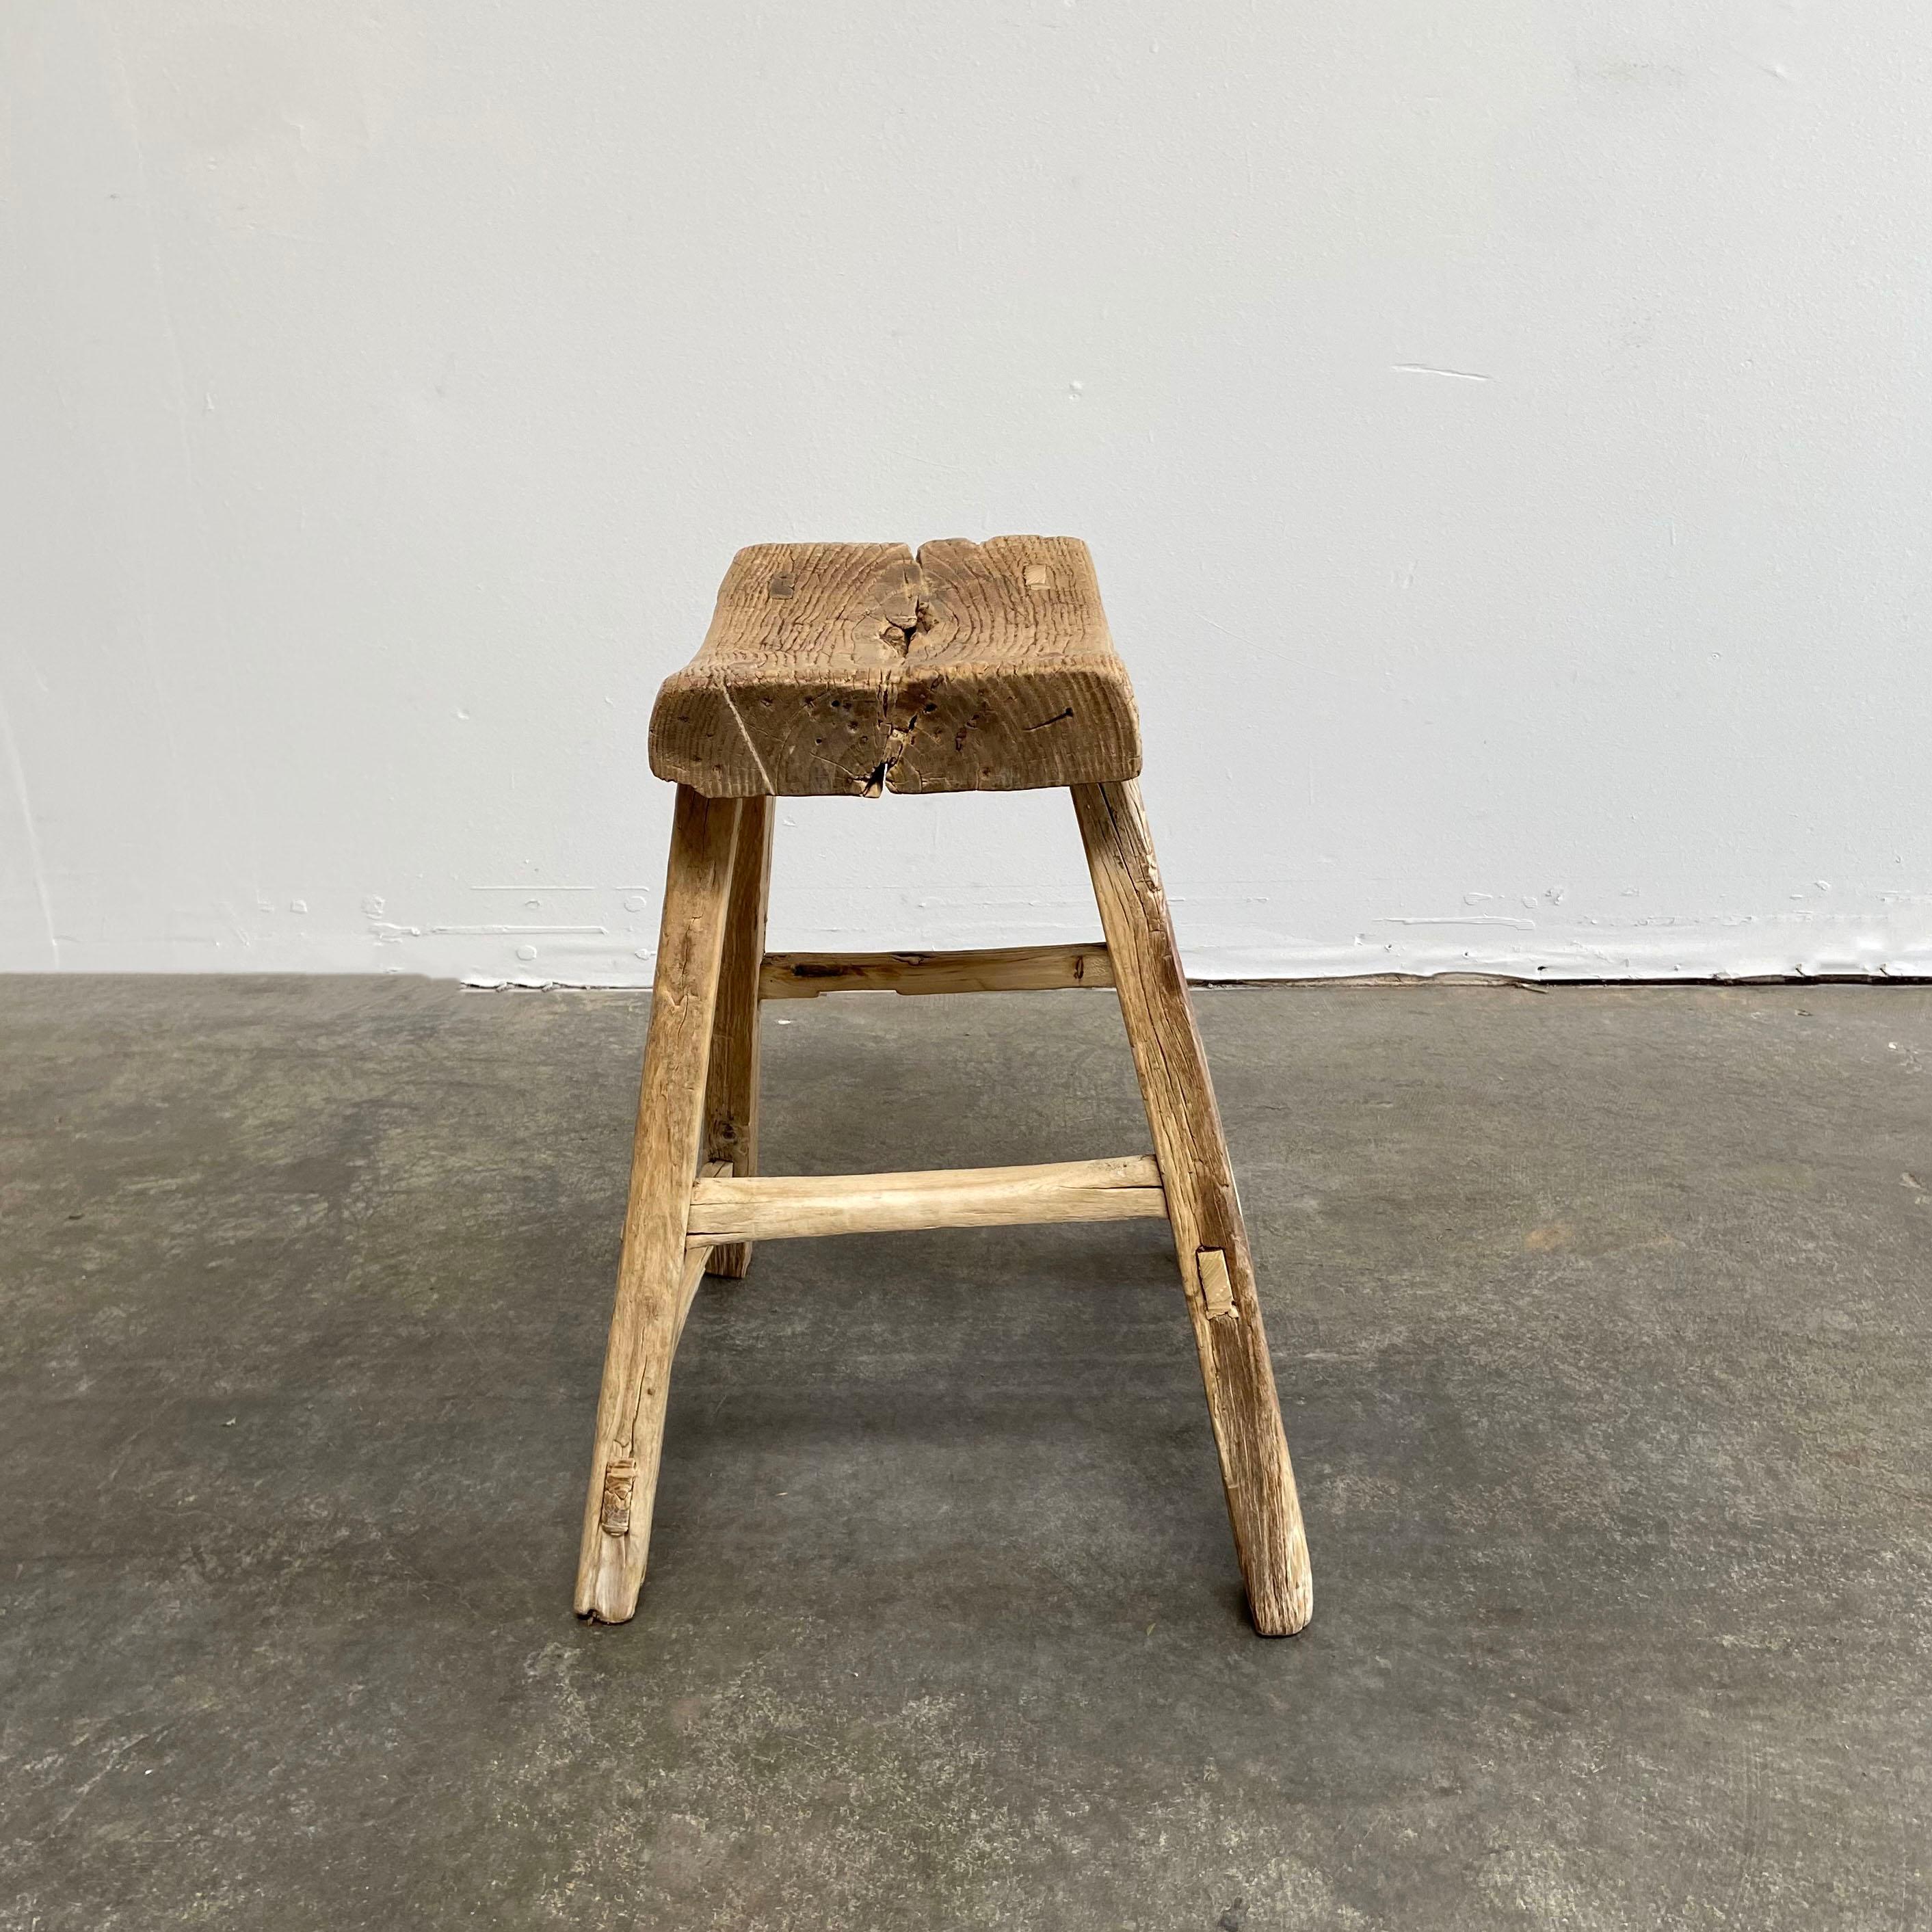 Vintage antique elm wood stool with curved seat.
These are the real vintage antique elm wood stools! Beautiful antique patina, with weathering and age, these are solid and sturdy ready for daily use, use as a table, stool, drink table, they are